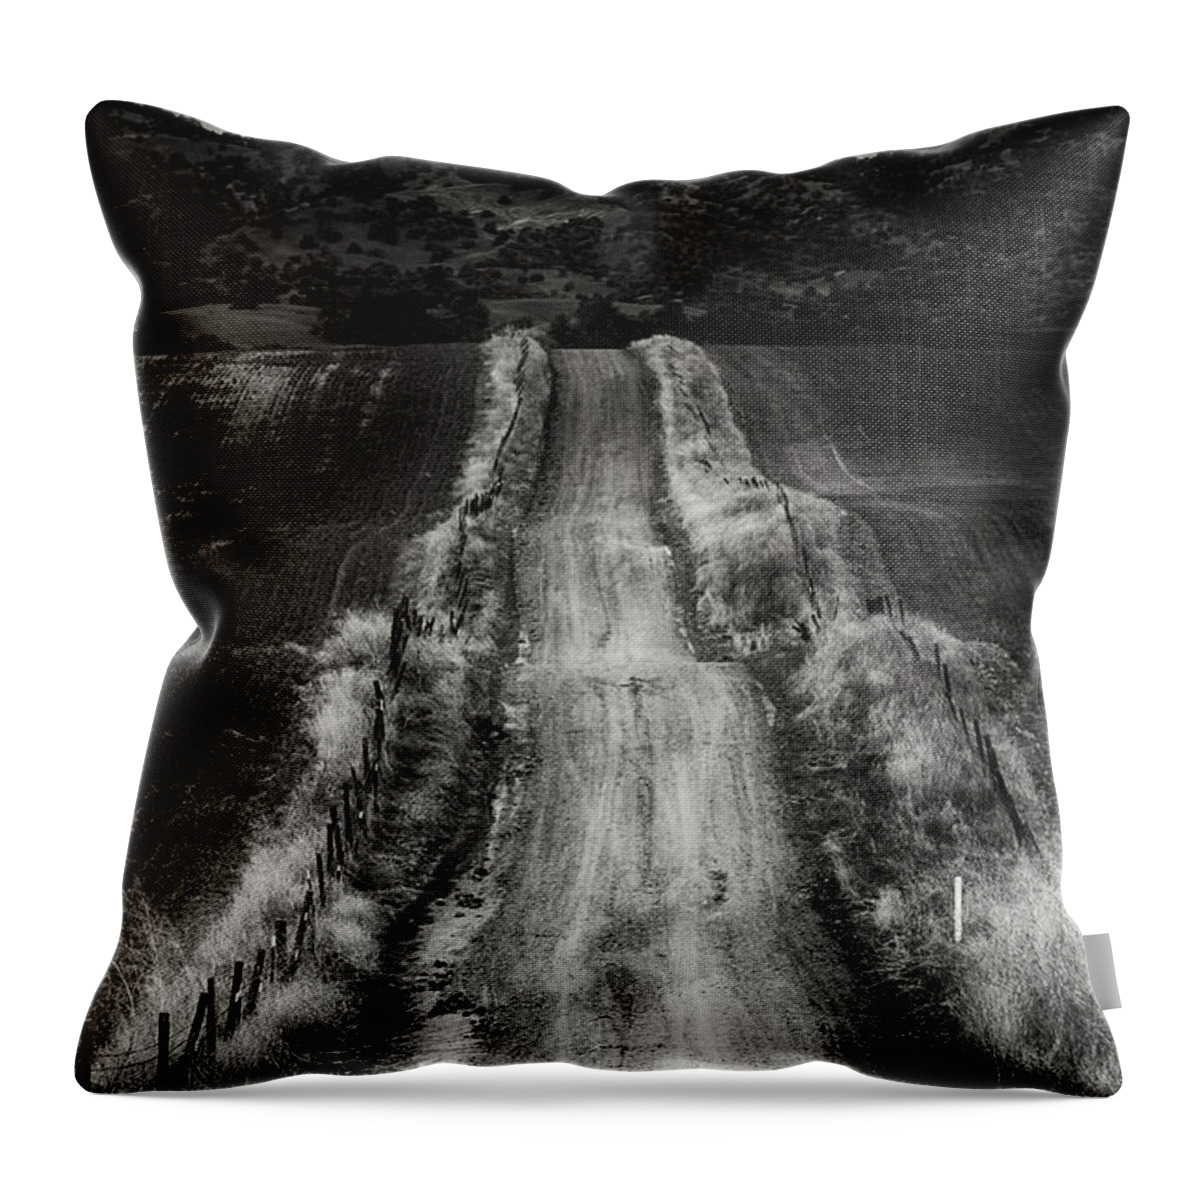 Road Throw Pillow featuring the photograph Road Into The Hills by Robert Woodward